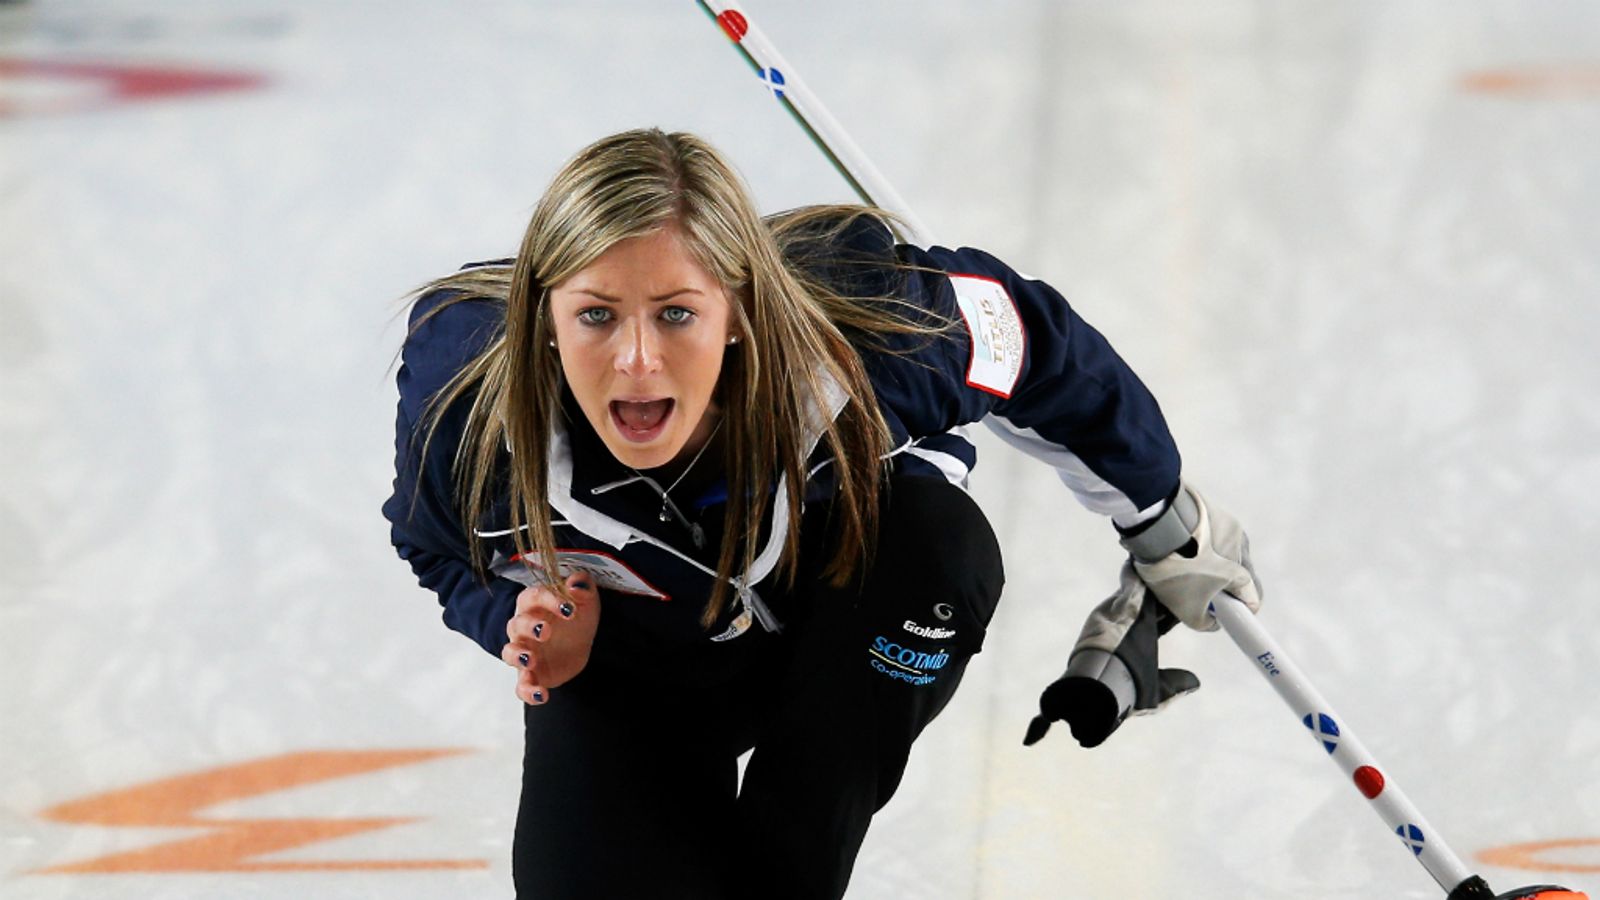 Women's curling team first Team GB members named for Winter Olympics